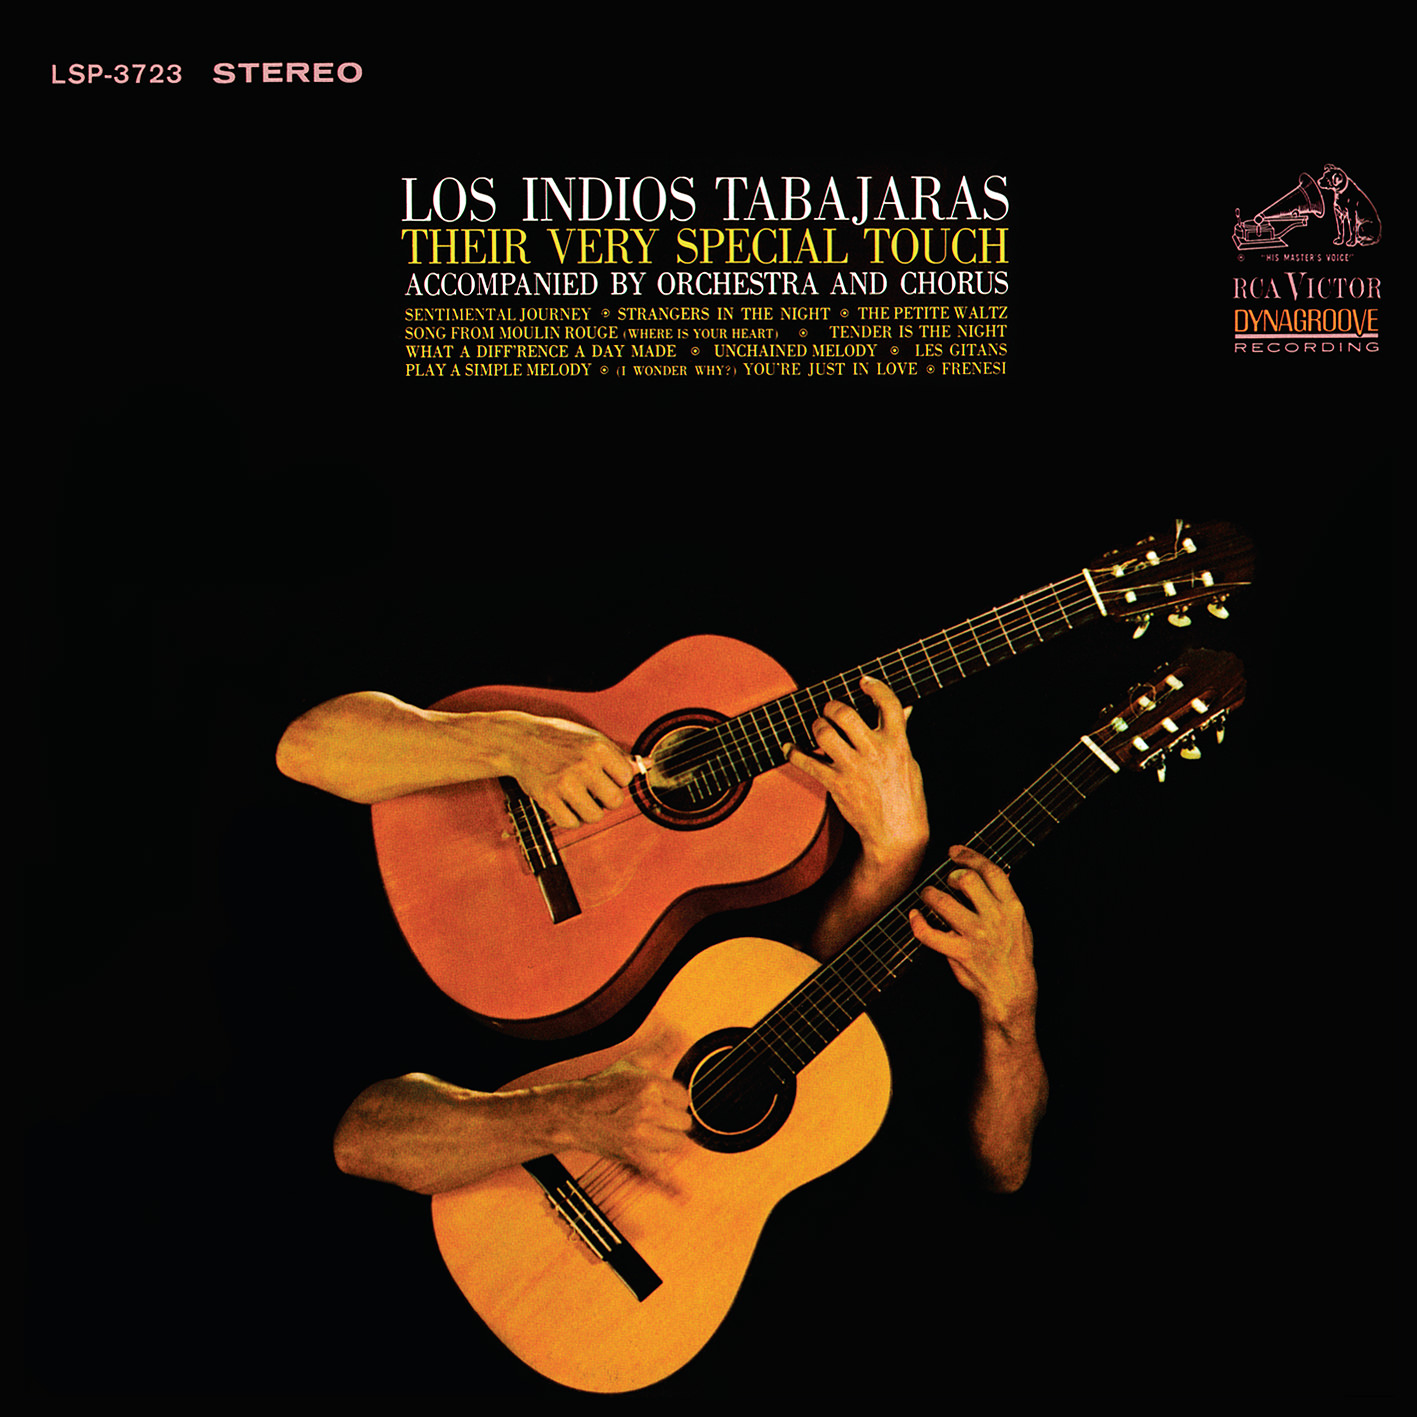 Los Indios Tabajaras - Their Very Special Touch (1967/2017) [AcousticSounds FLAC 24bit/192kHz]